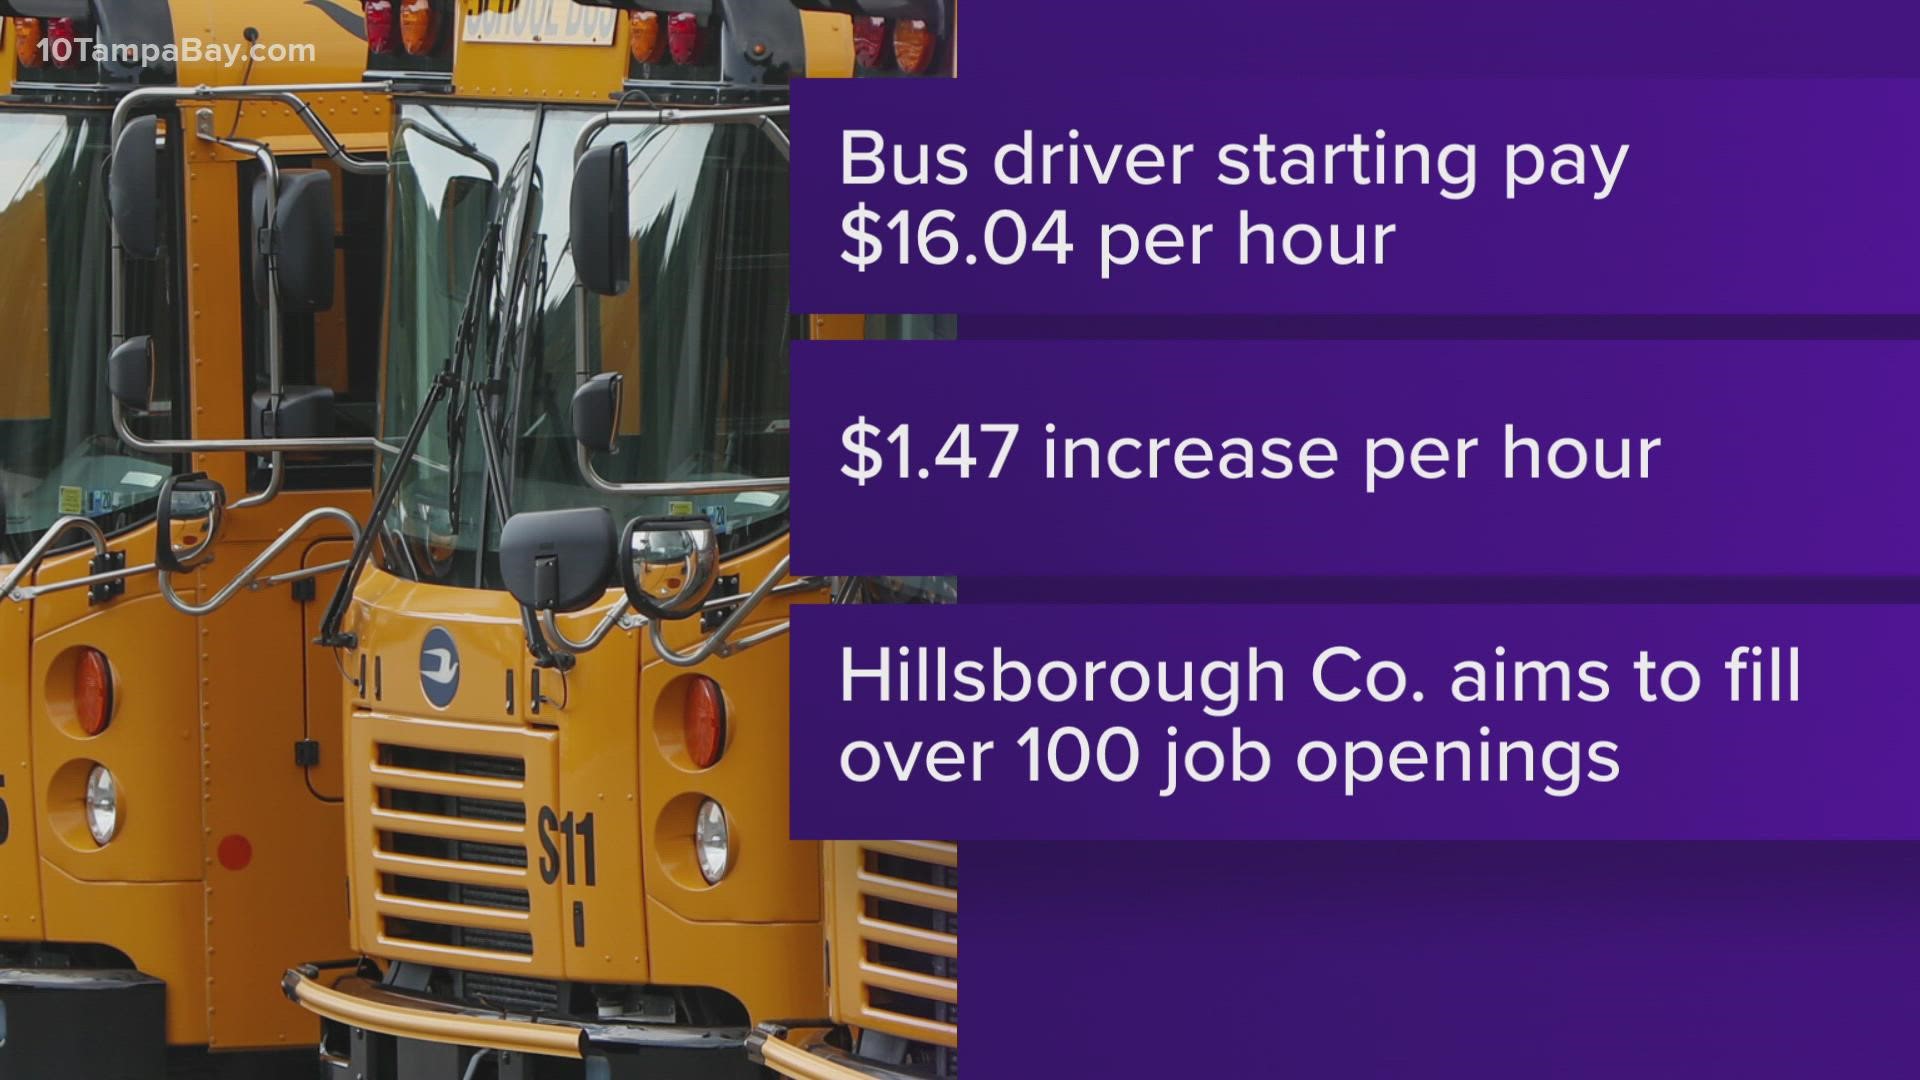 If it passes, bus drivers in Hillsborough will now get $16.04 per hour instead of the former $14.57.